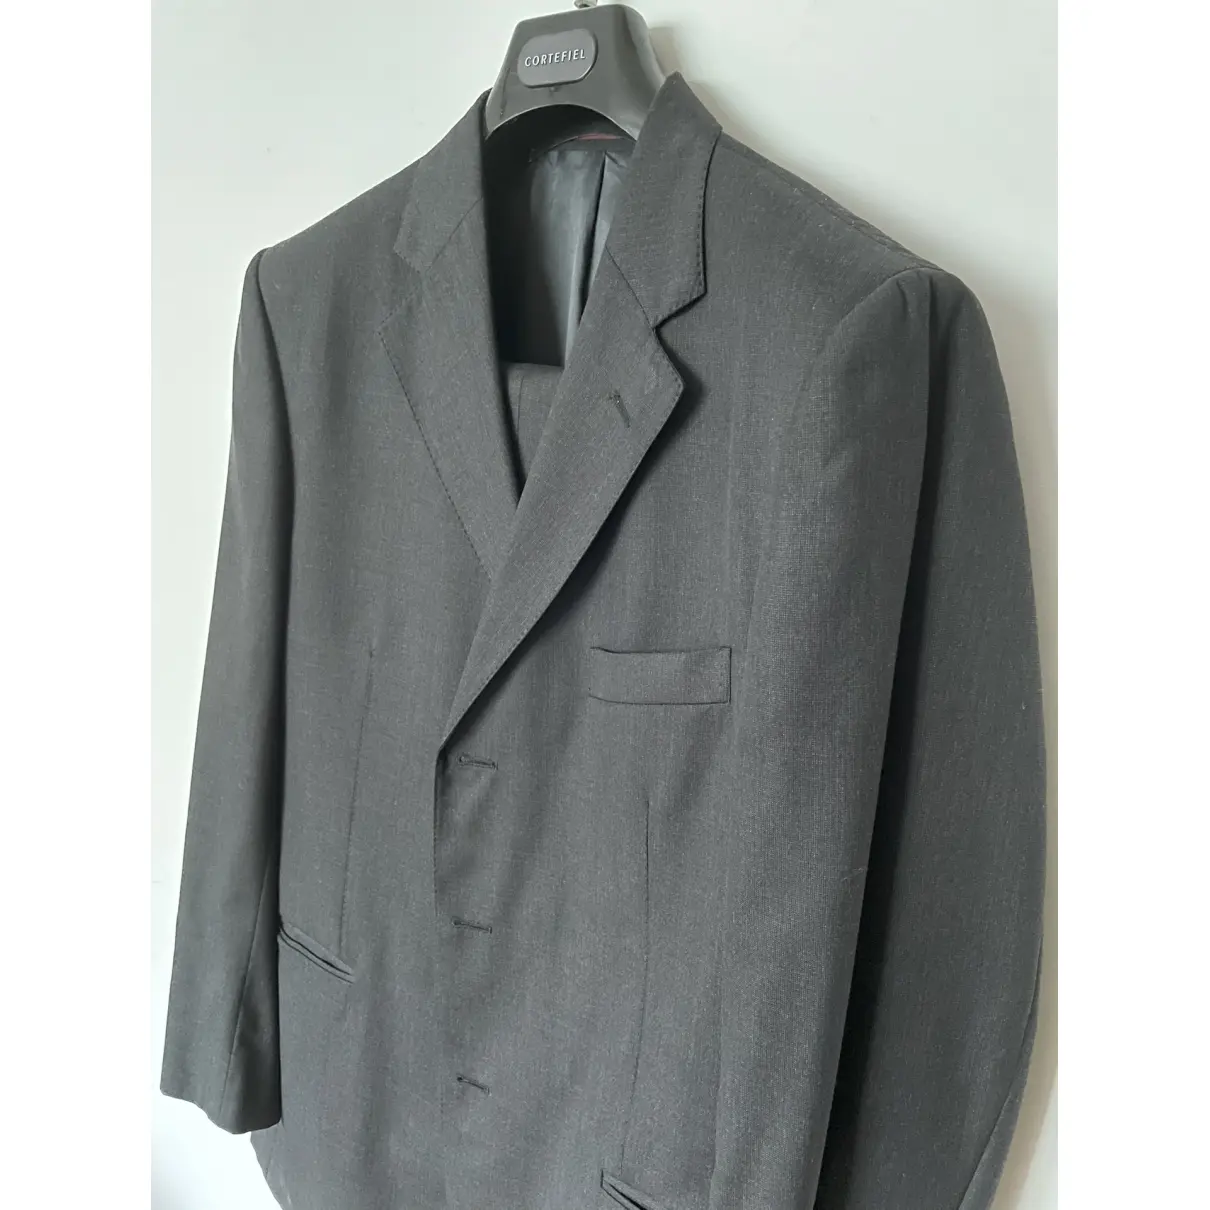 Buy Massimo Dutti Wool suit online